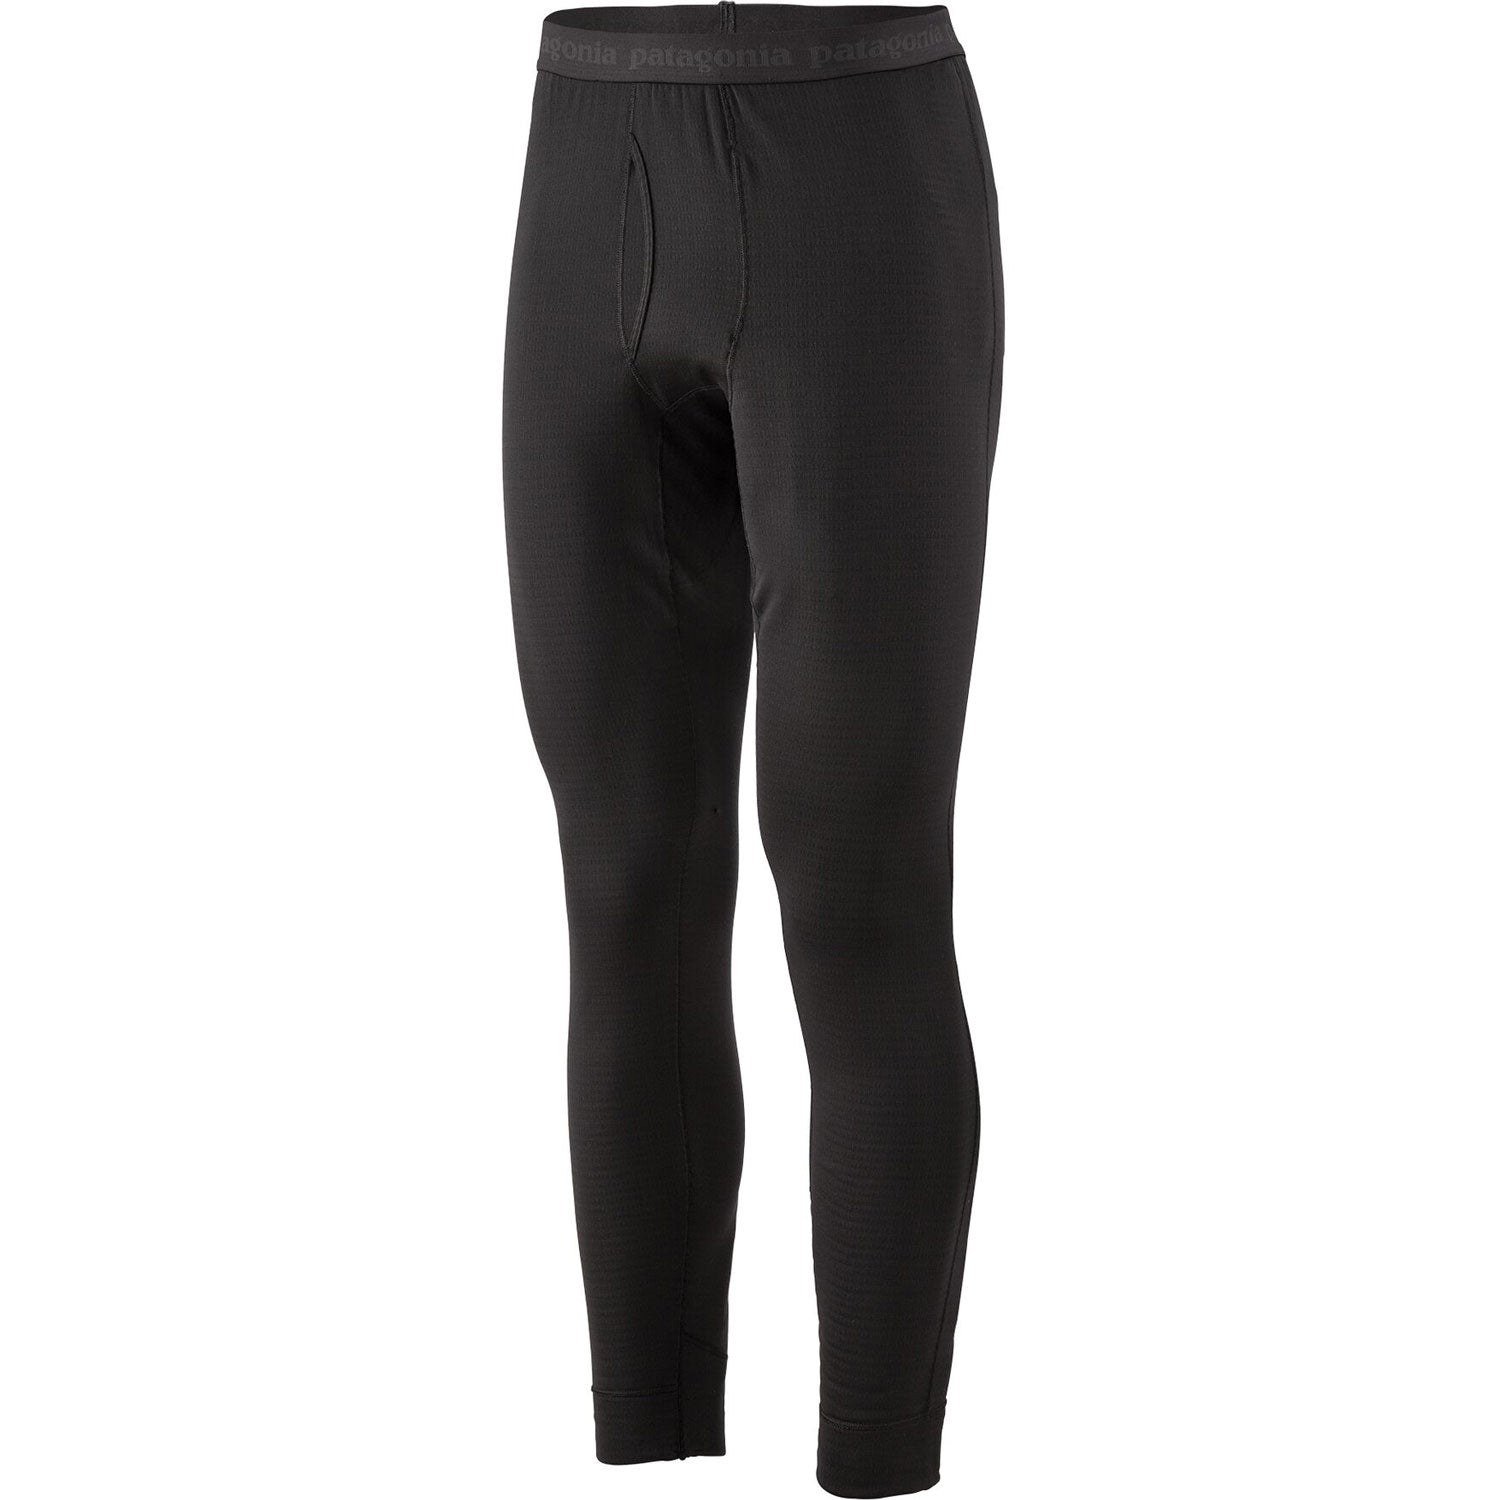 Patagonia Men's Capilene Thermal Weight Bottoms – Outdoorplay